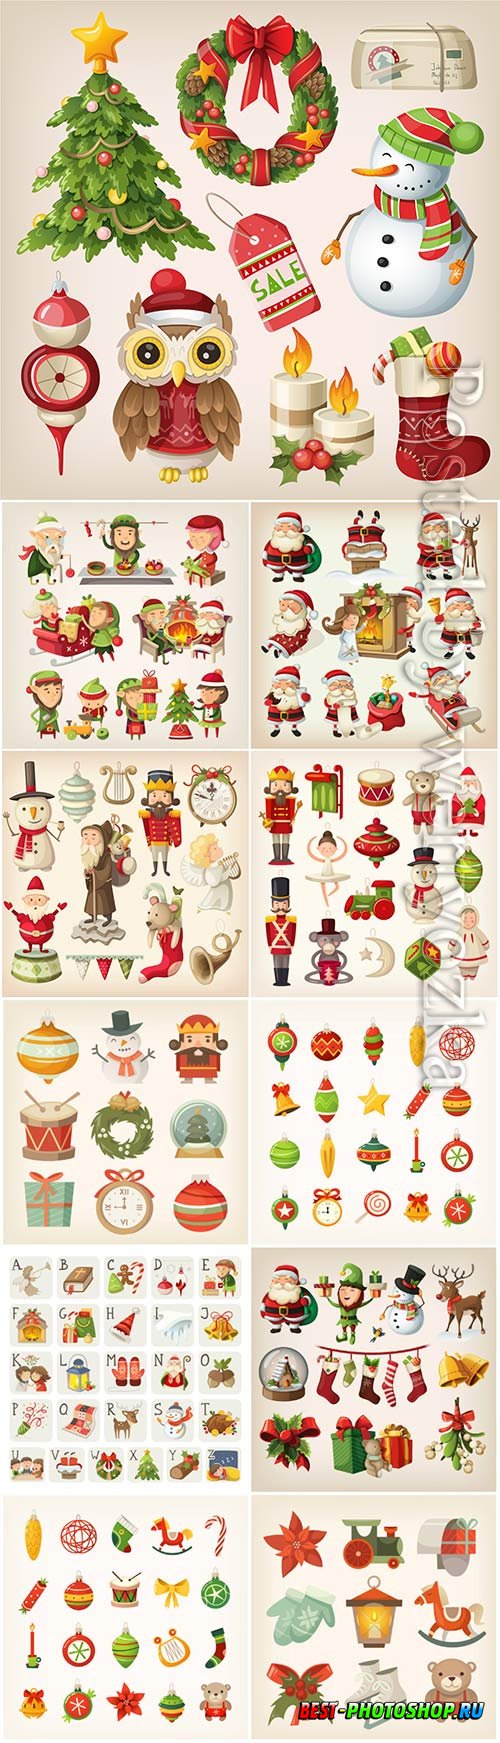 Set of christmas items and vector characters